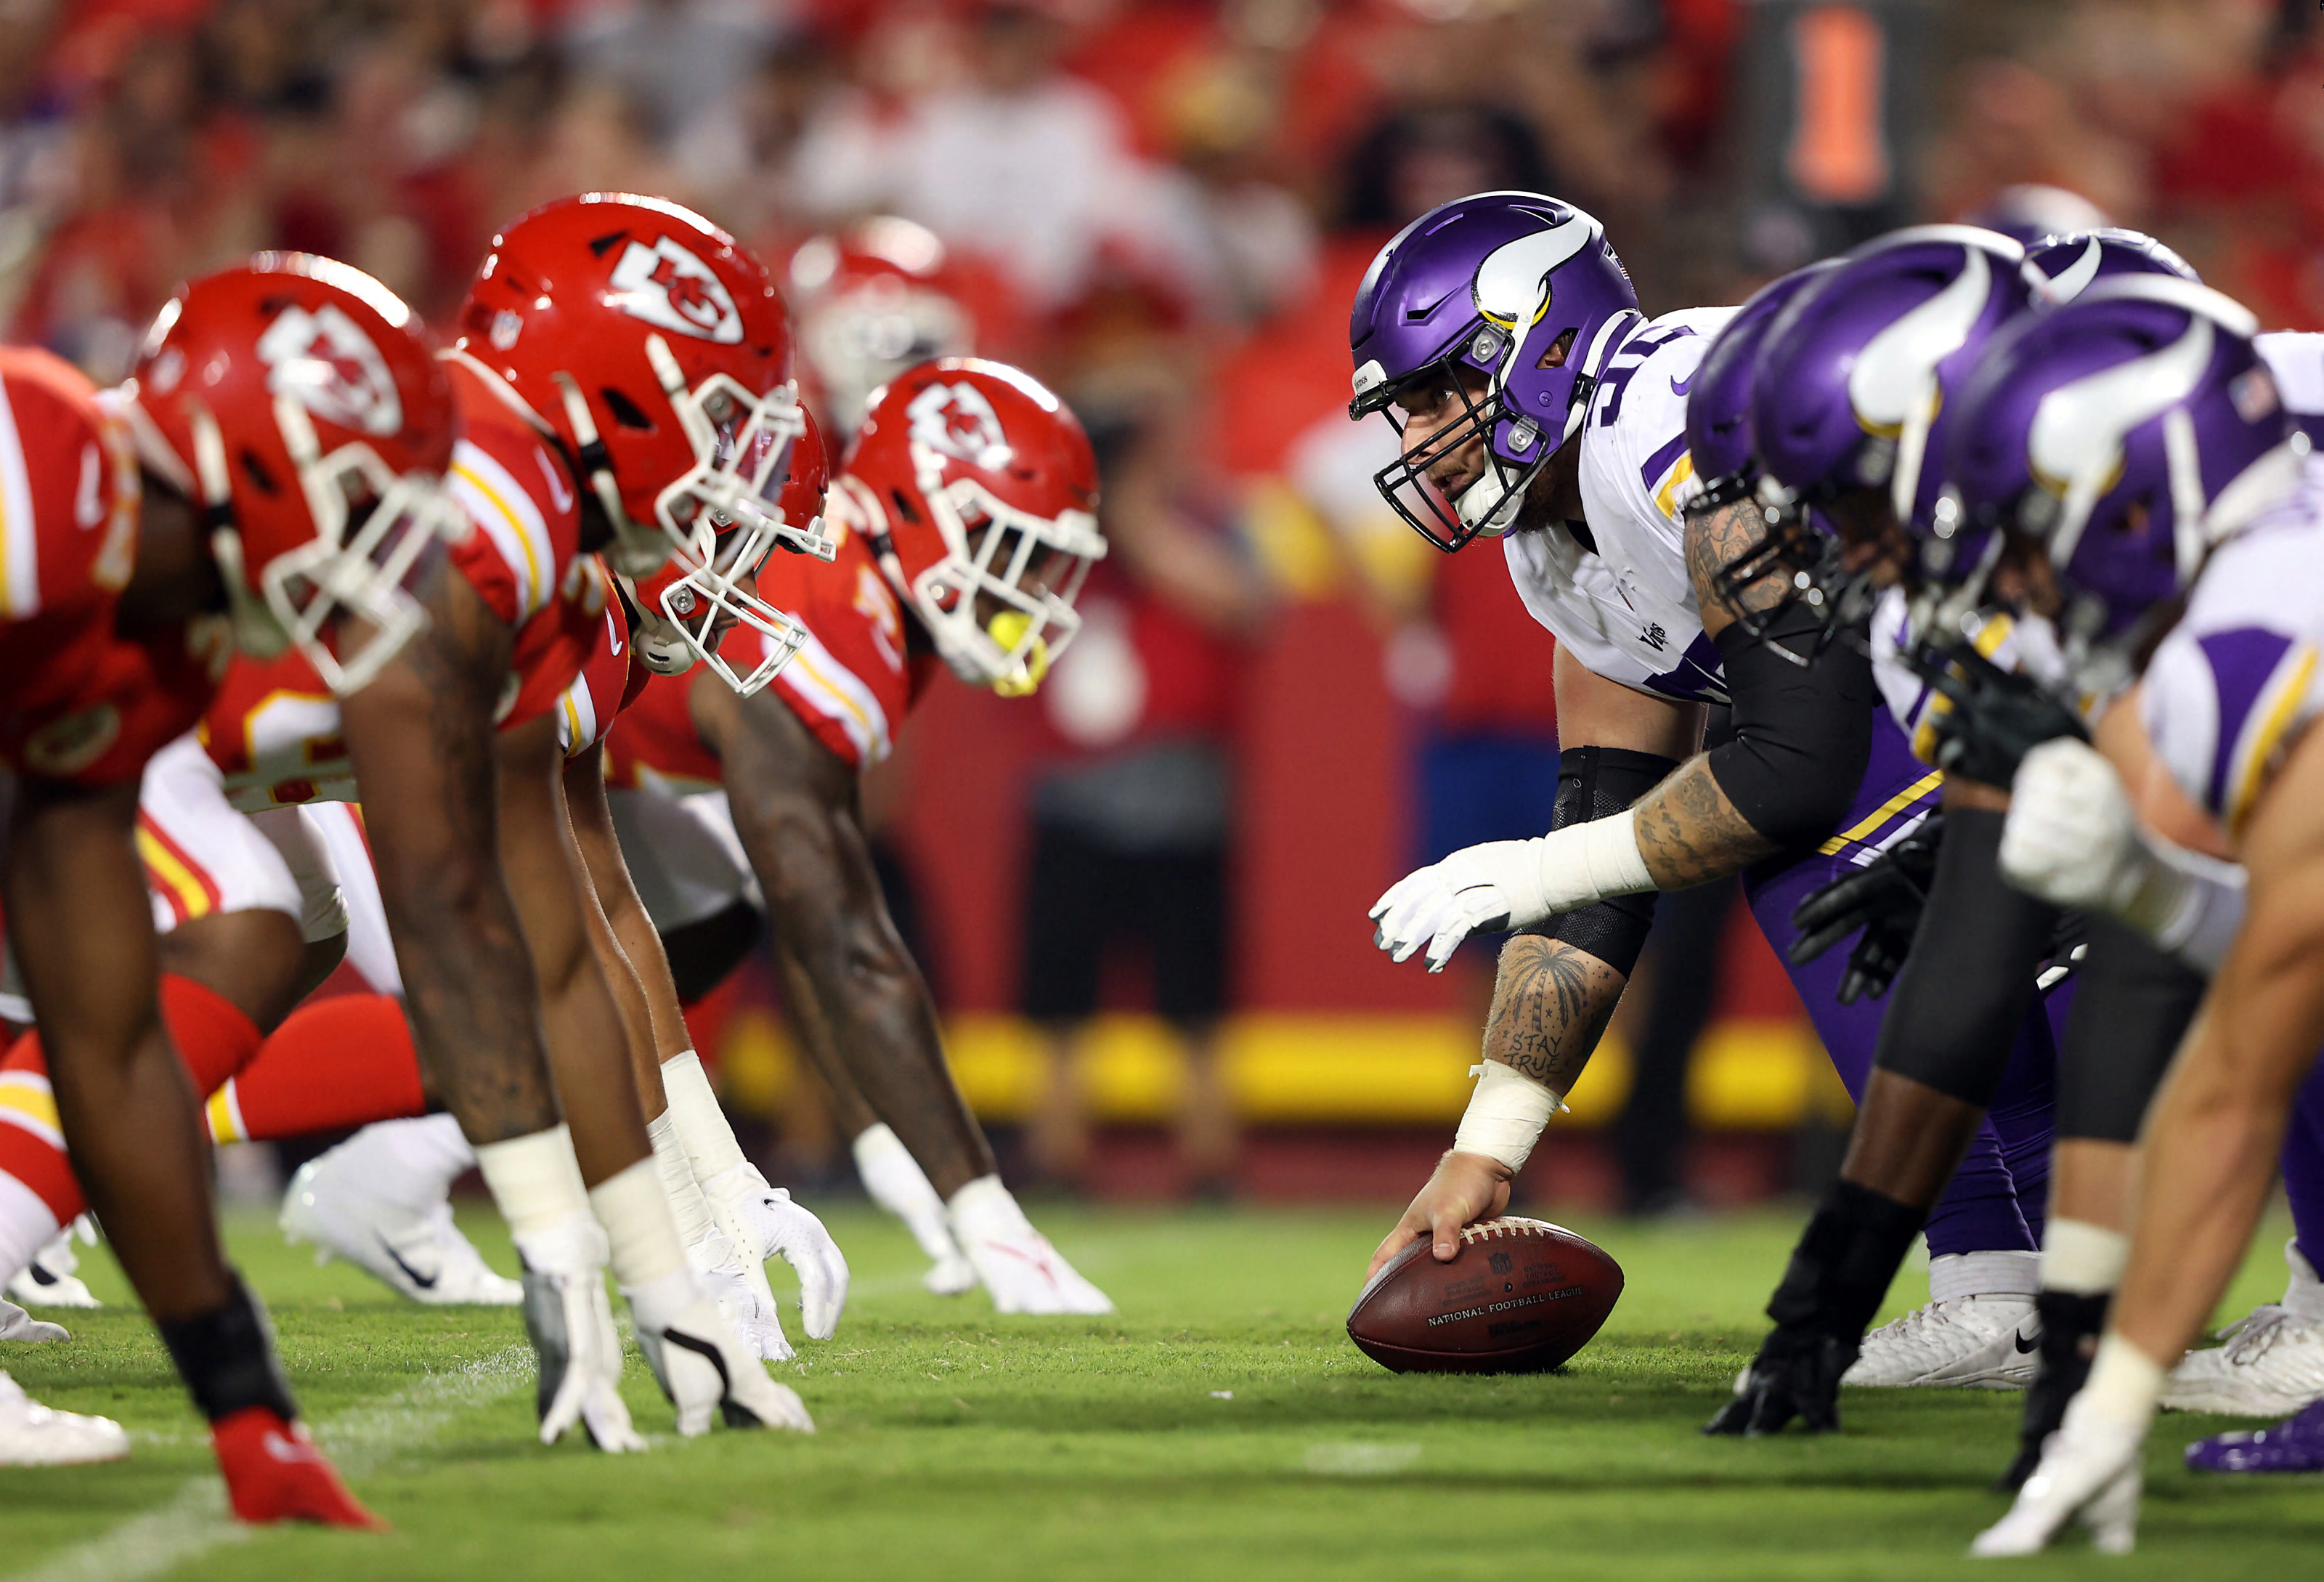 Linebackers impress and other takeaways from KC Chiefs vs. Vikings